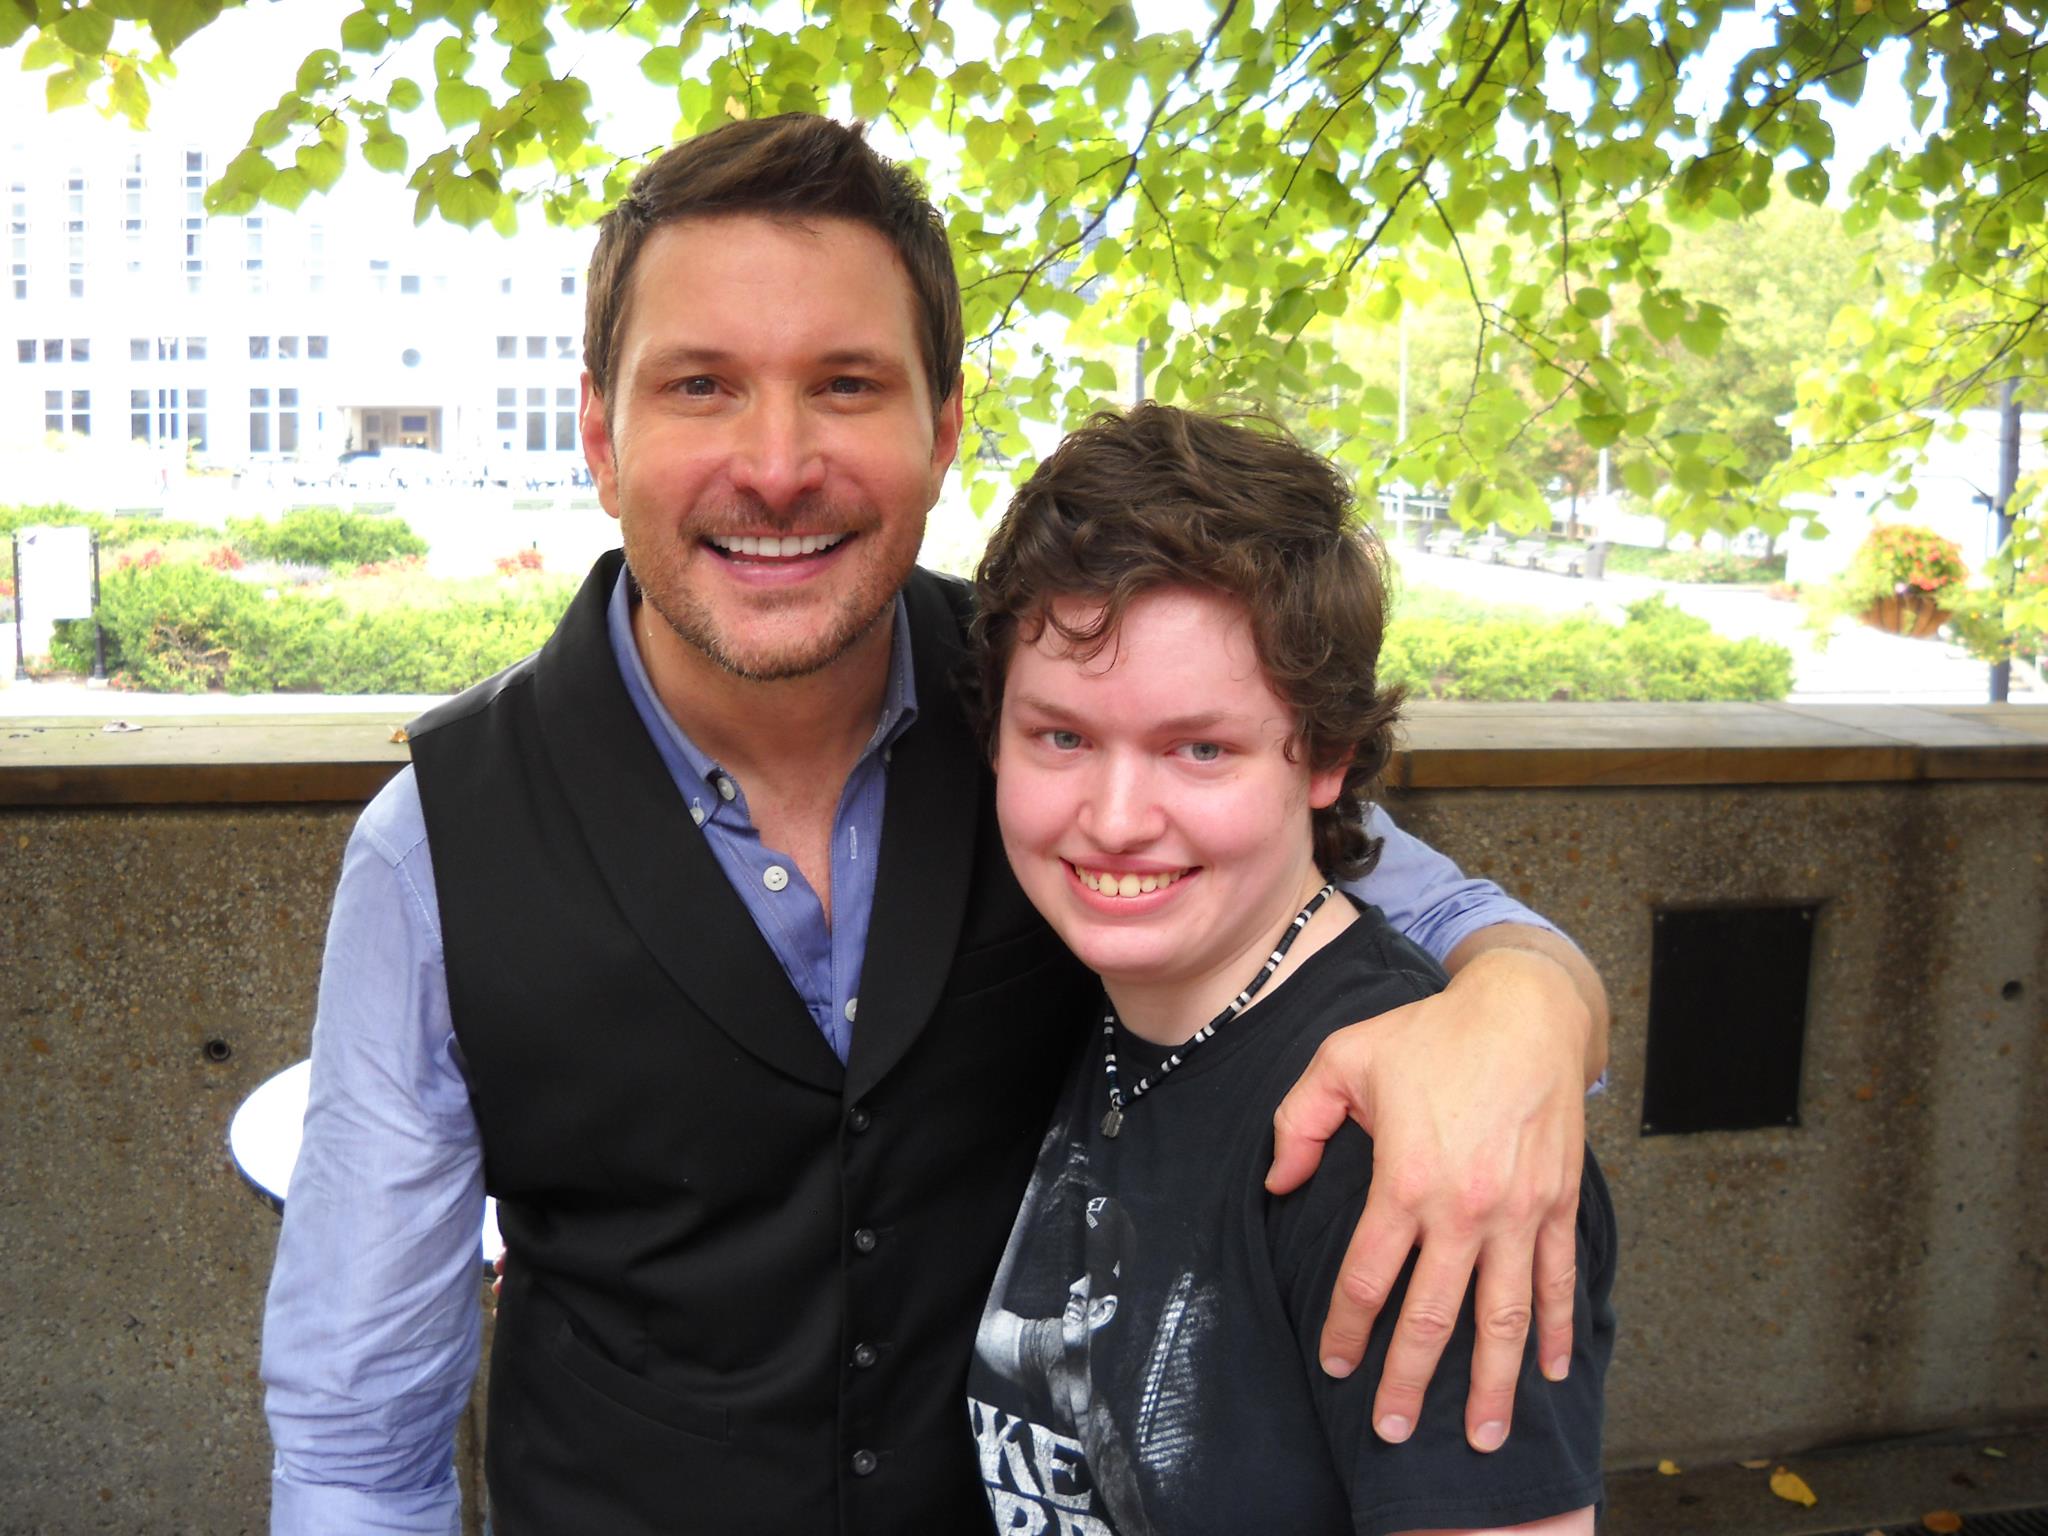 Me and Ty Herndon